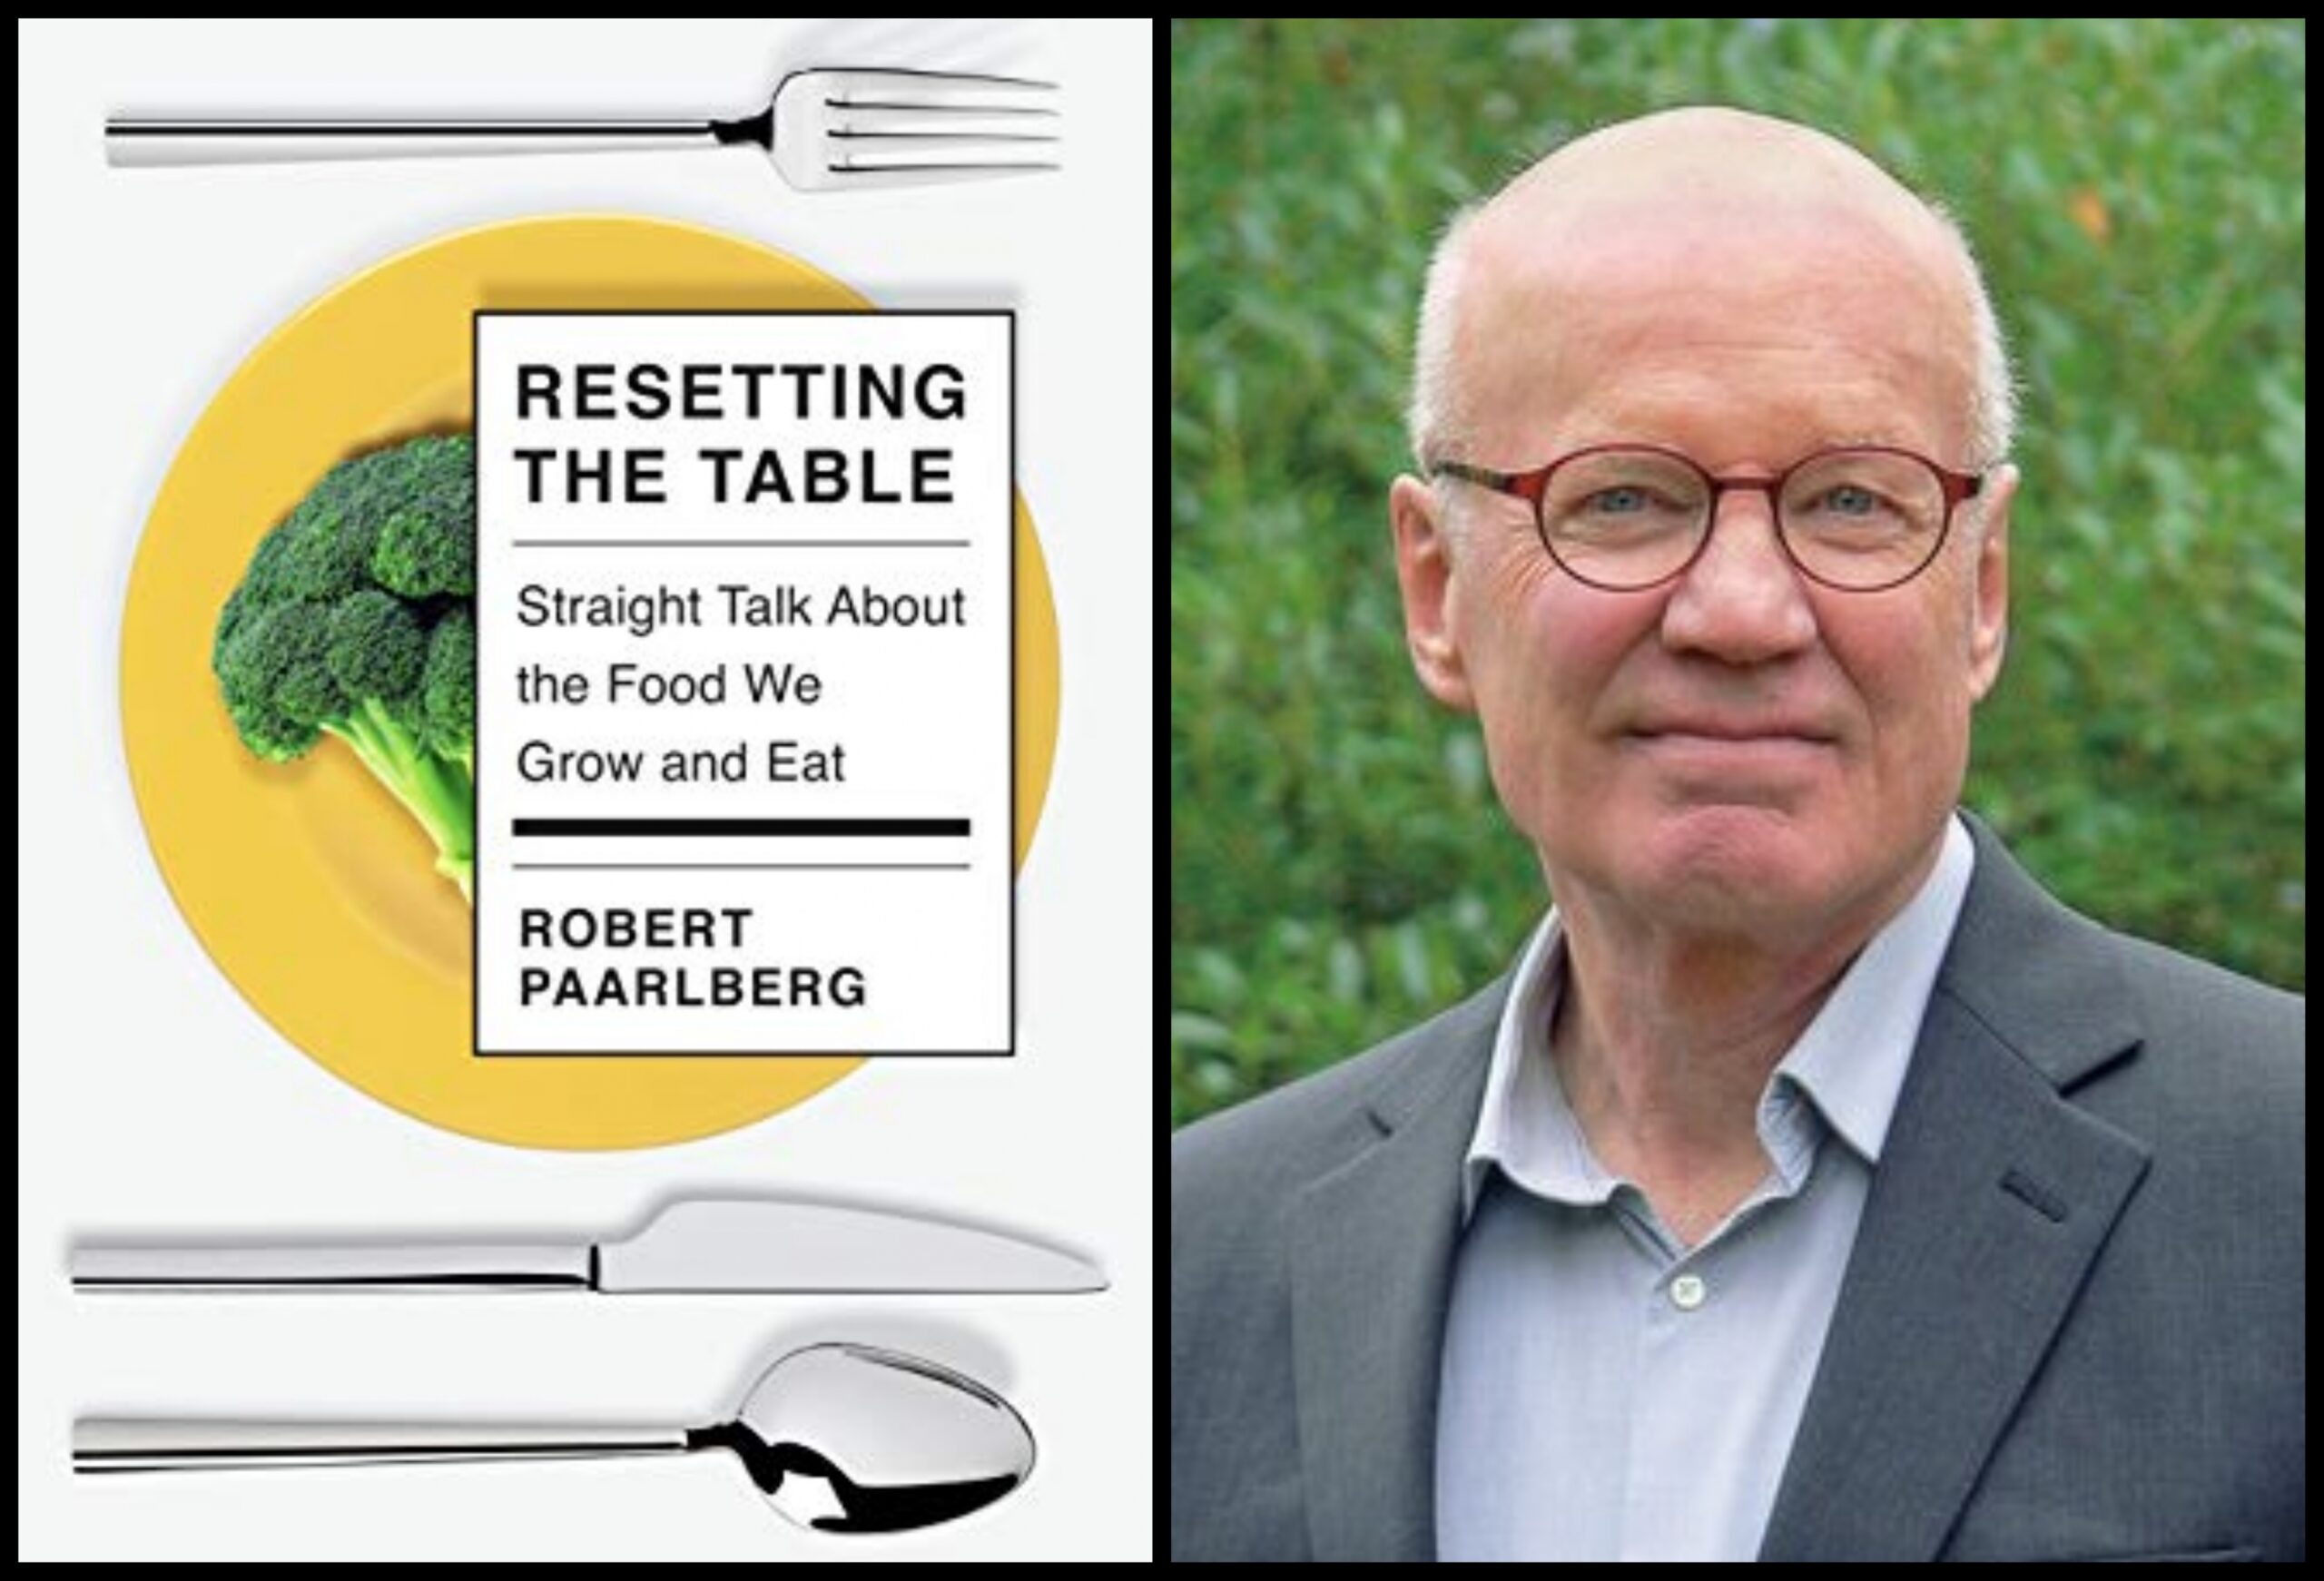 Cover of "Resetting the Table"; image of Robert Paarlberg